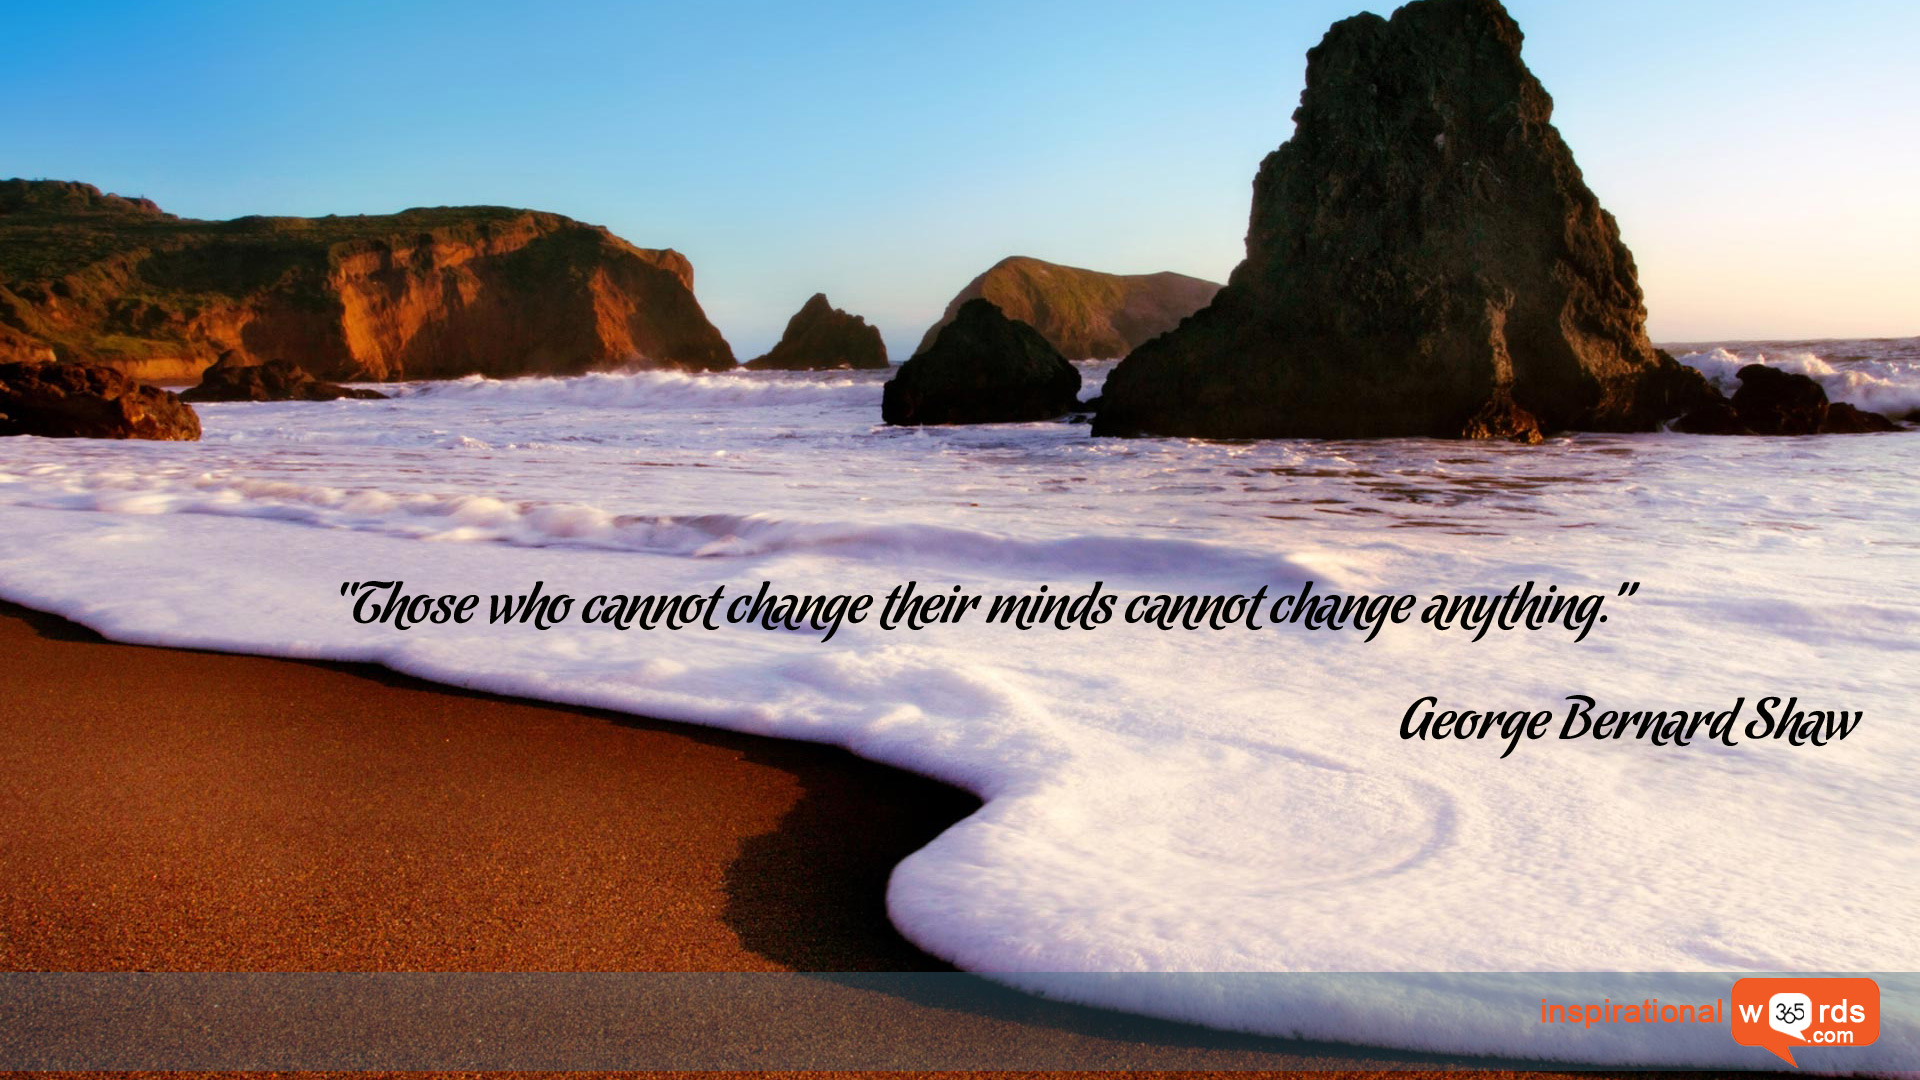 Inspirational Wallpaper Quote by George Bernard Shaw